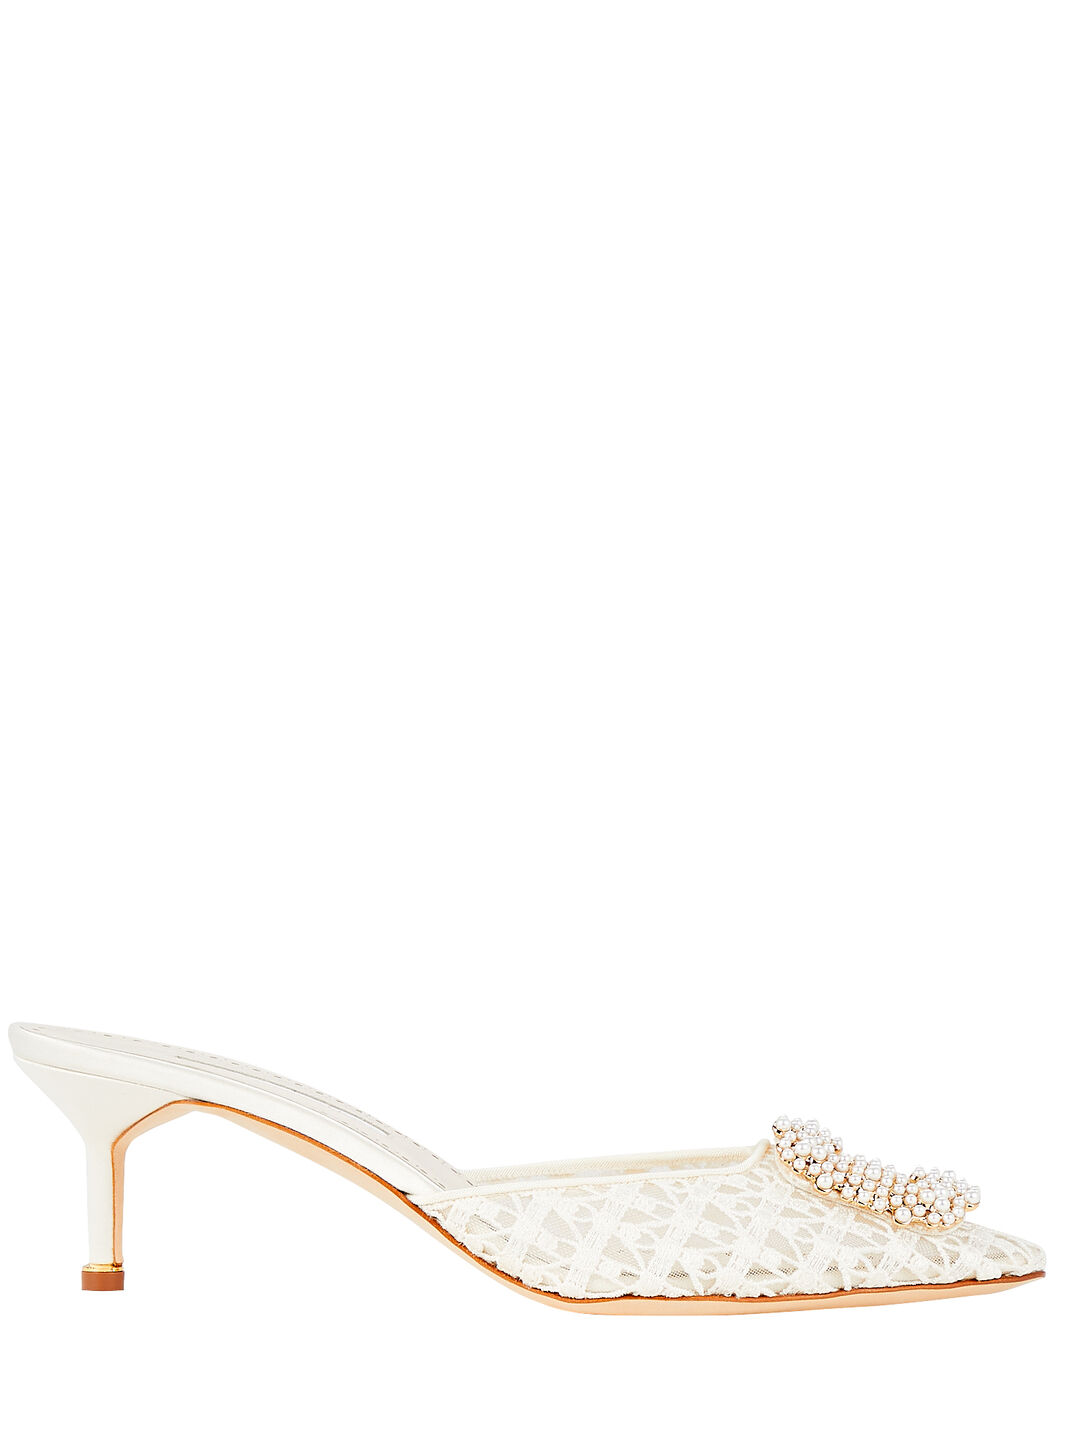 Hangisi 70 Pearl-Embellished Lace Mules